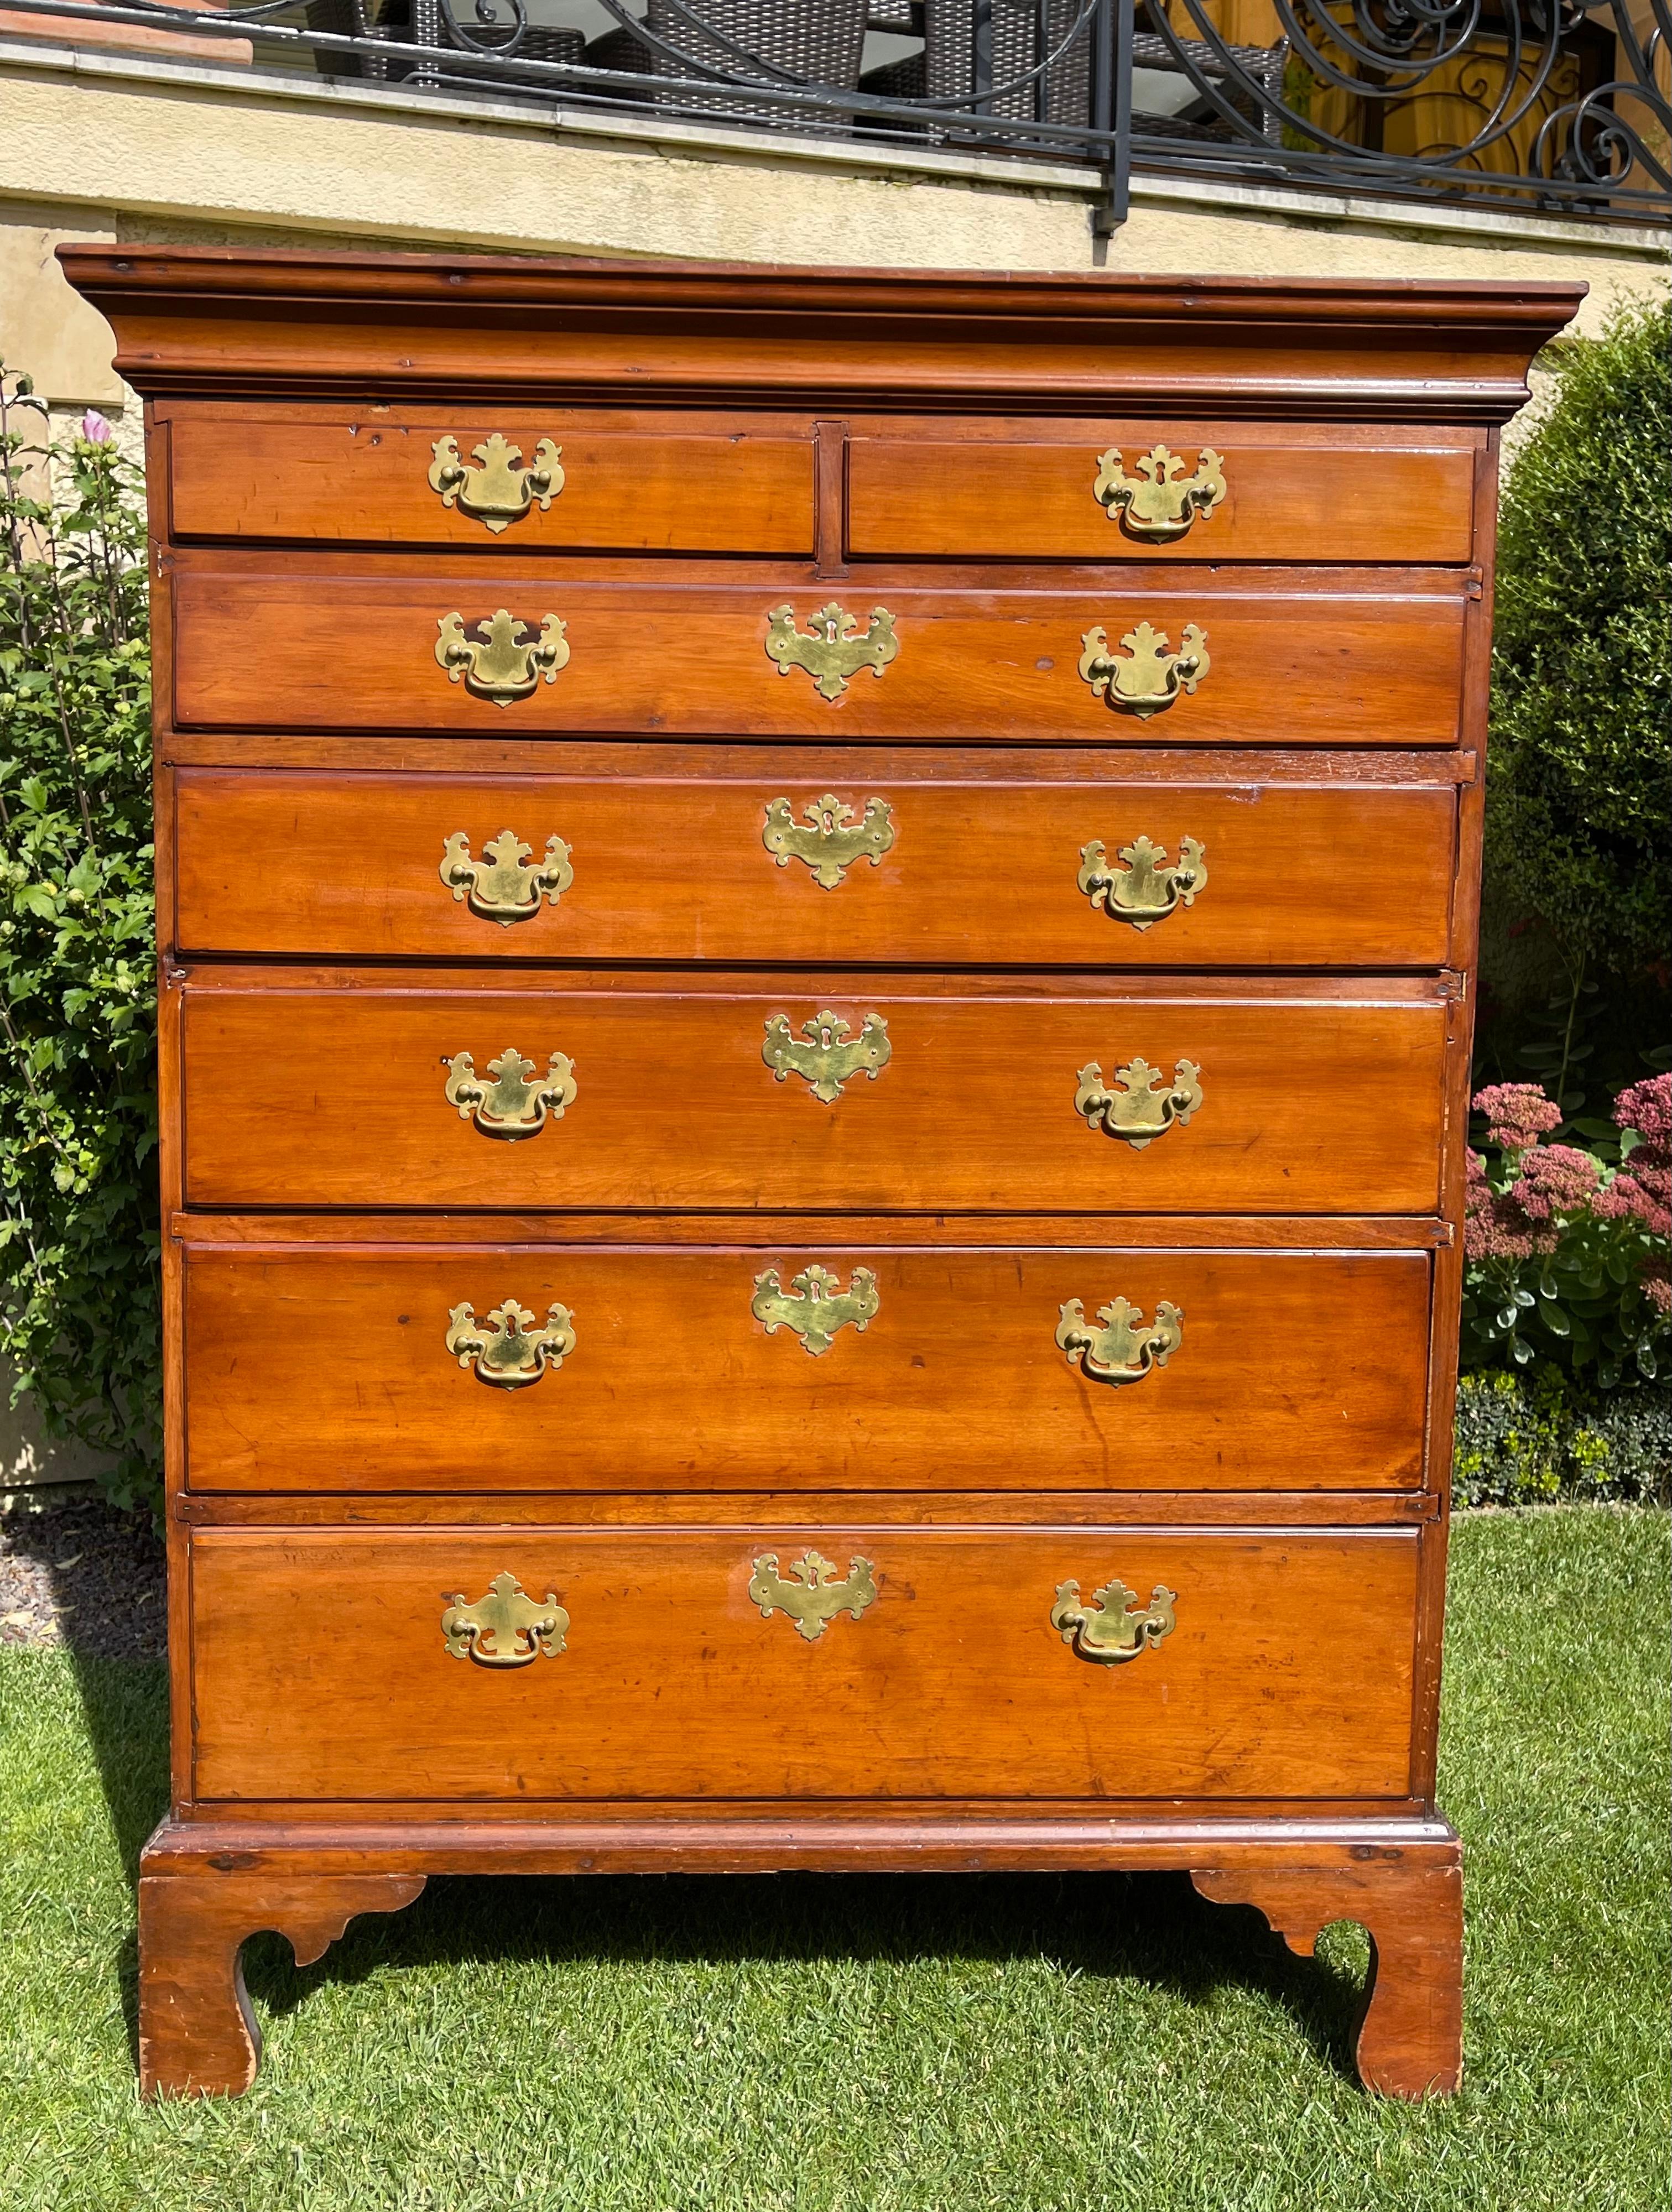 English-style mahogany drawer unit at support height. This piece of furniture dates from the 18th century and has 7 drawers. It is in good condition.